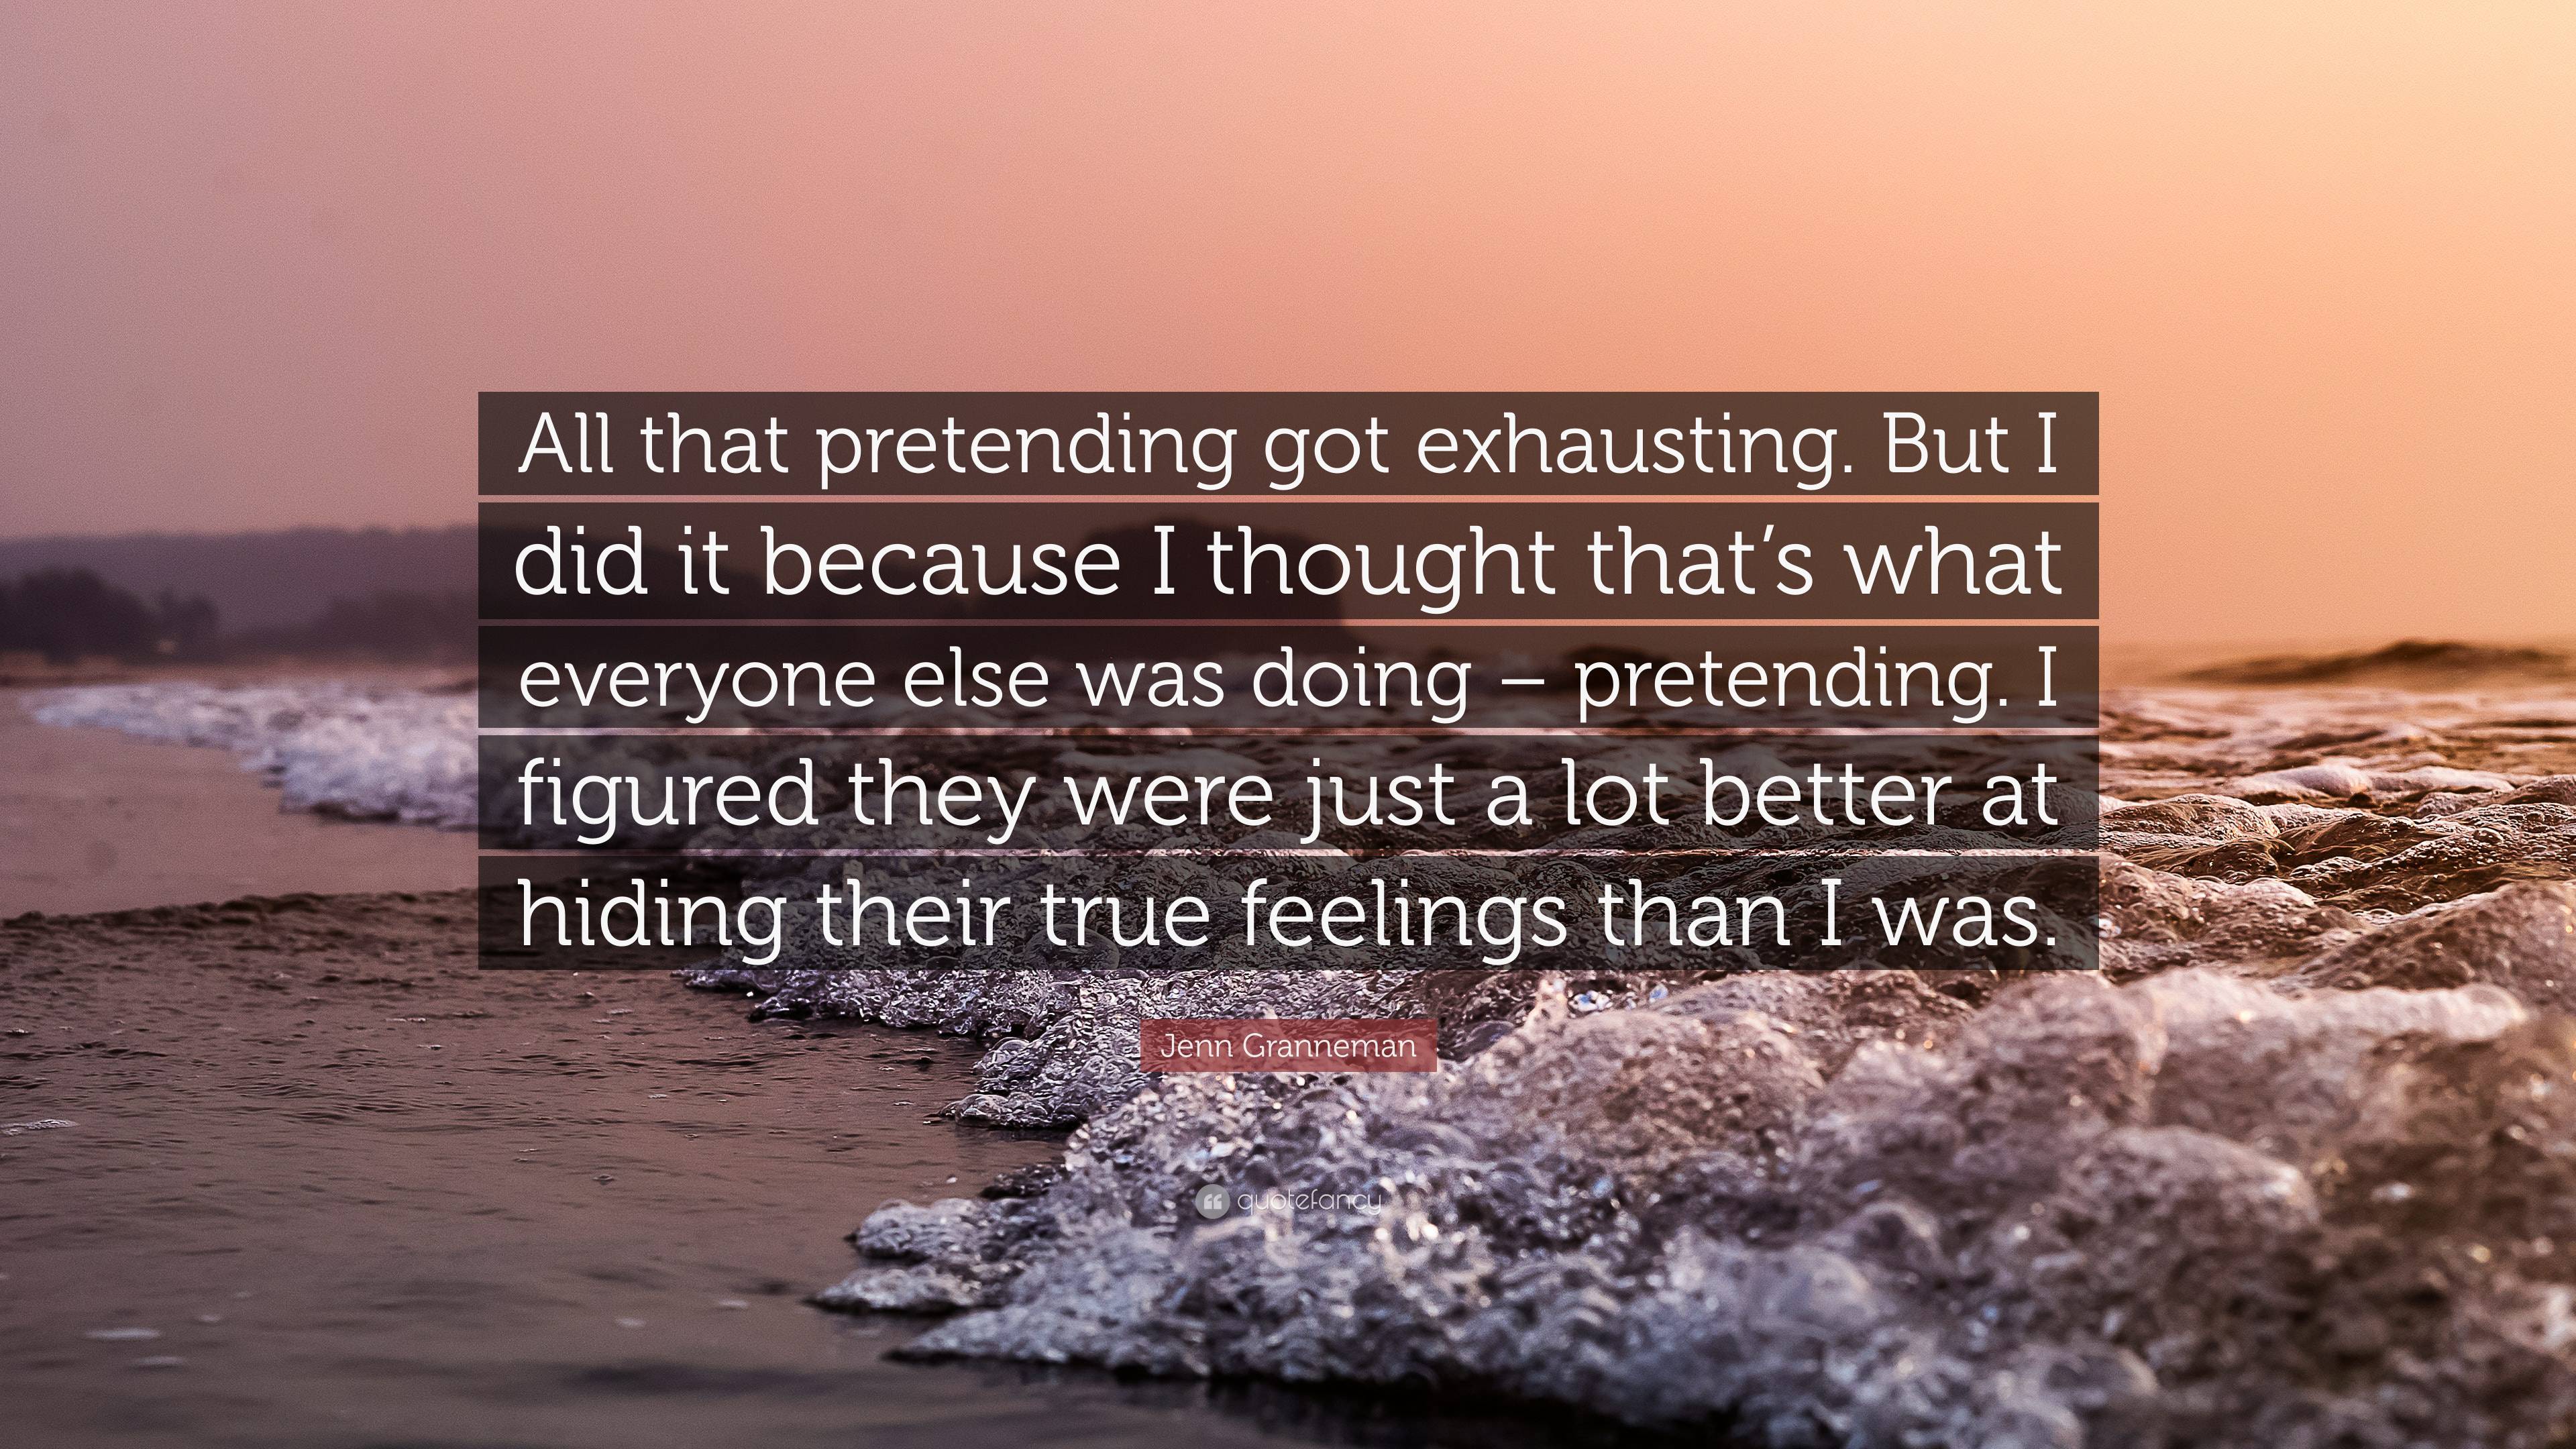 Jenn Granneman Quote: “All that pretending got exhausting. But I did it  because I thought that's what everyone else was doing – pretending. I f”